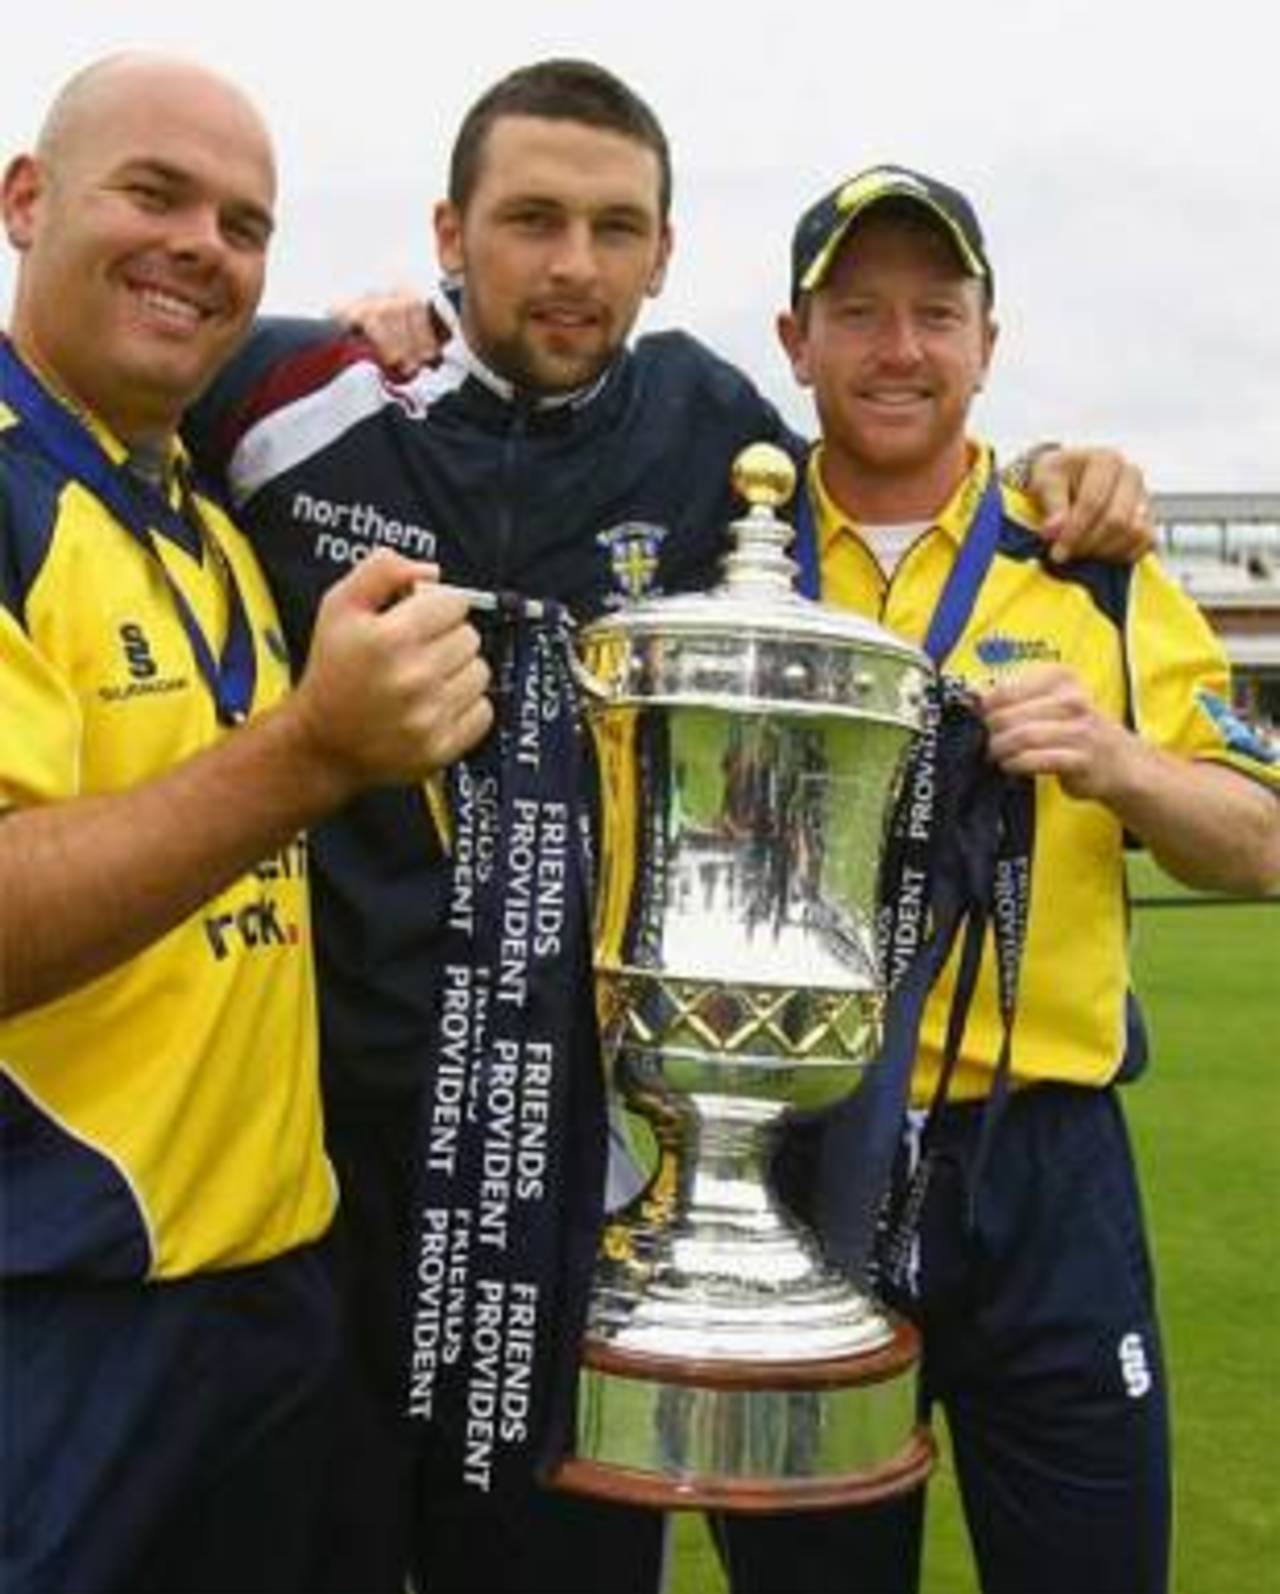 Neil Killeen, Steve Harmison and Paul Collingwood celebrate Durham's first silverware, Durham v Hampshire, Friends Provident Trophy final, Lord's, August 18, 2007